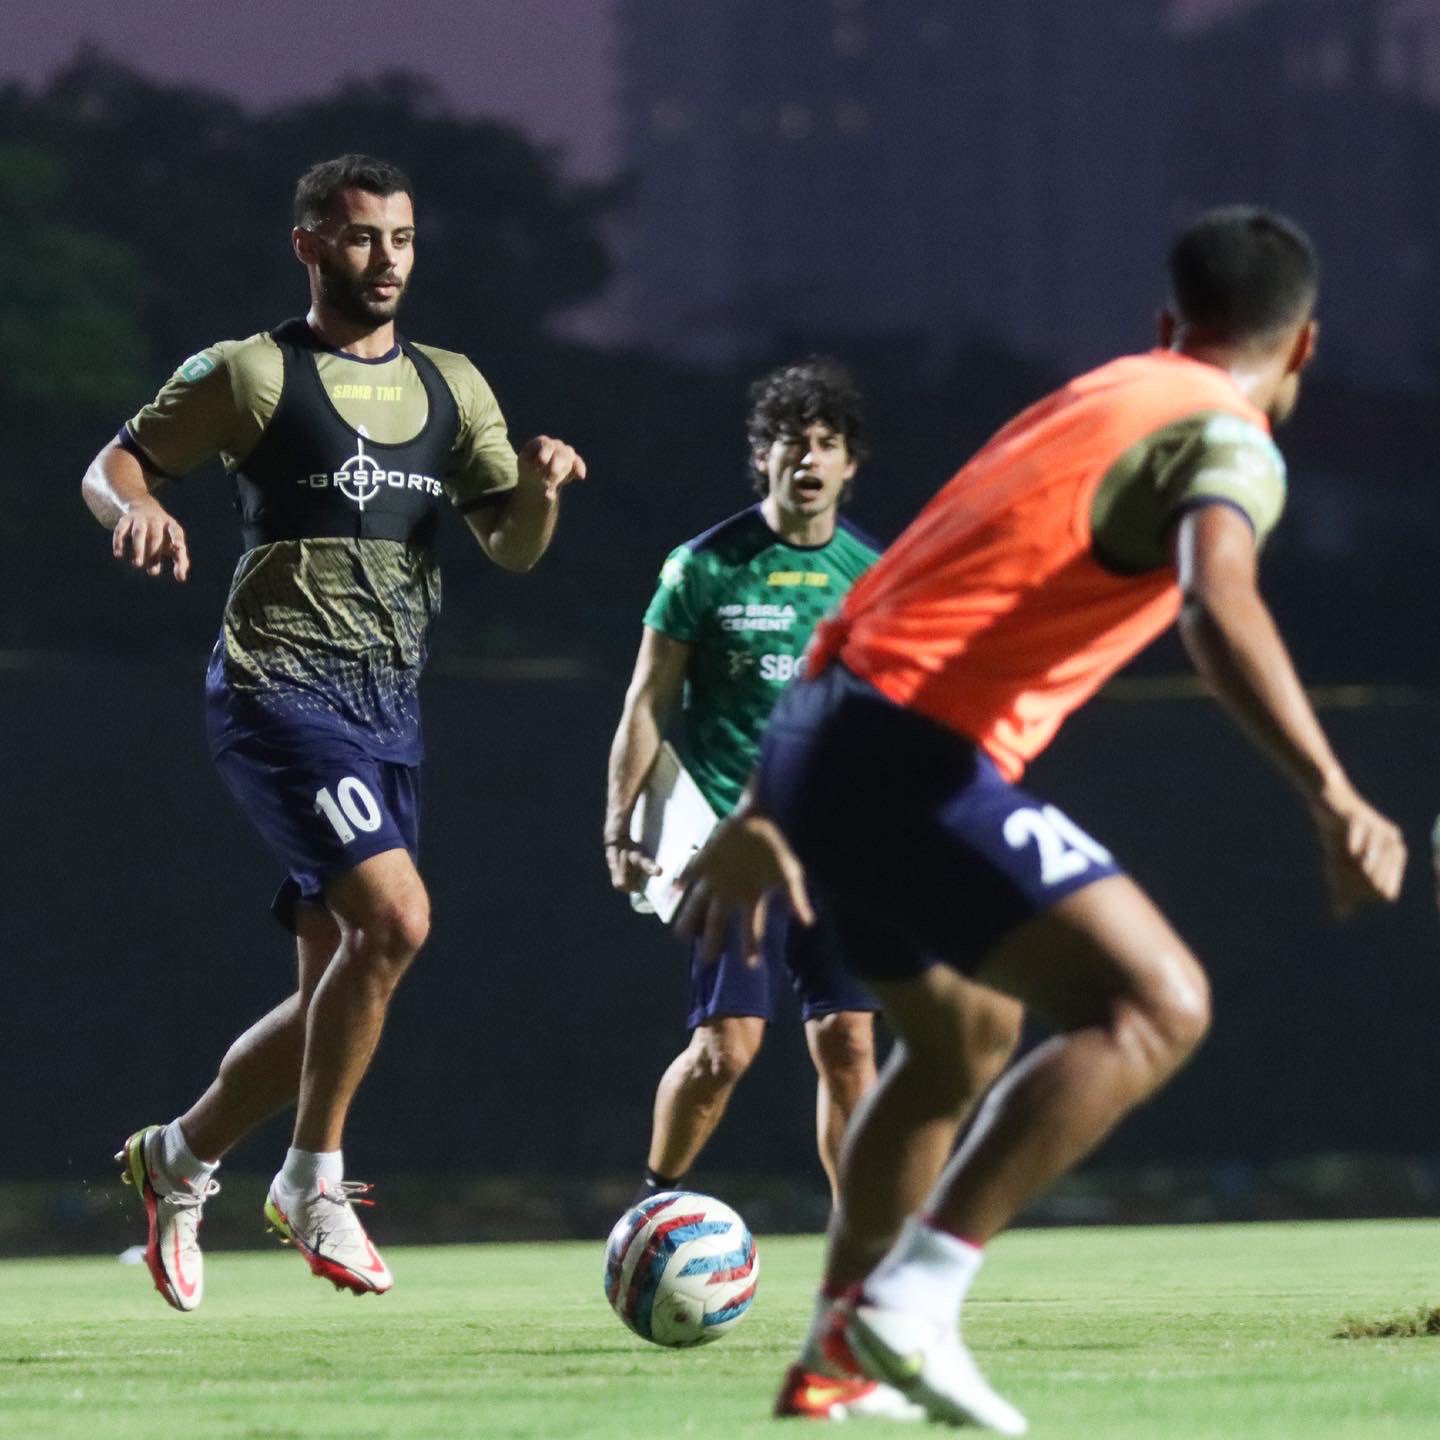 ATK Mohun Bagan vs Blue Star SC: ATK Mohun Bagan aims to fly past Sri Lanka's Blue Star SC in the Preliminary round fixture of the AFC Cup 2022 - Follow Live Updates 